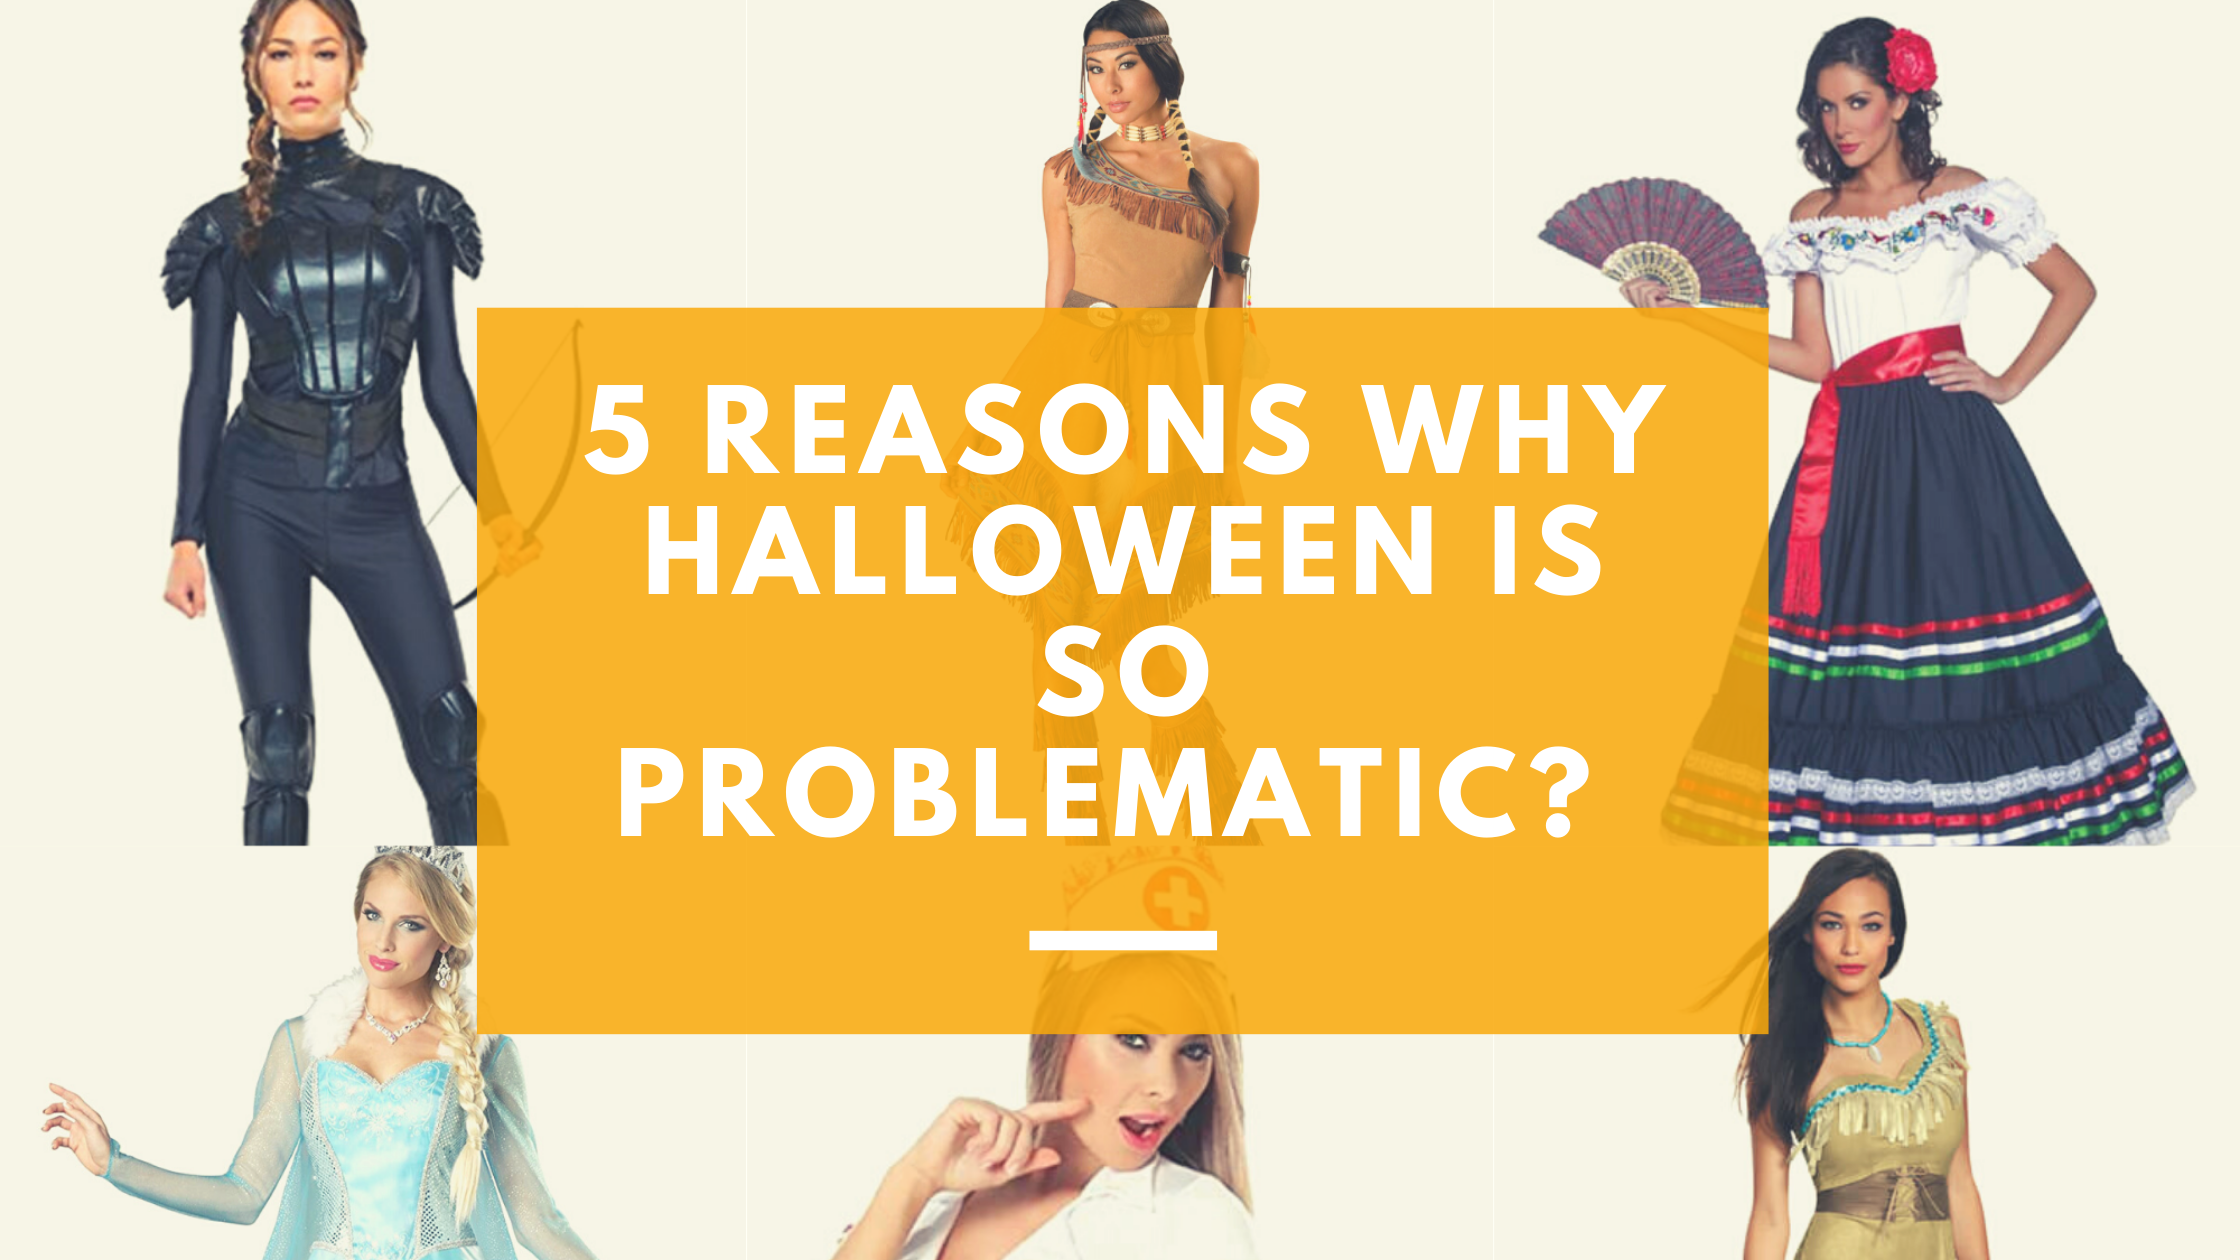 5 Reasons Why Halloween is so Problematic?